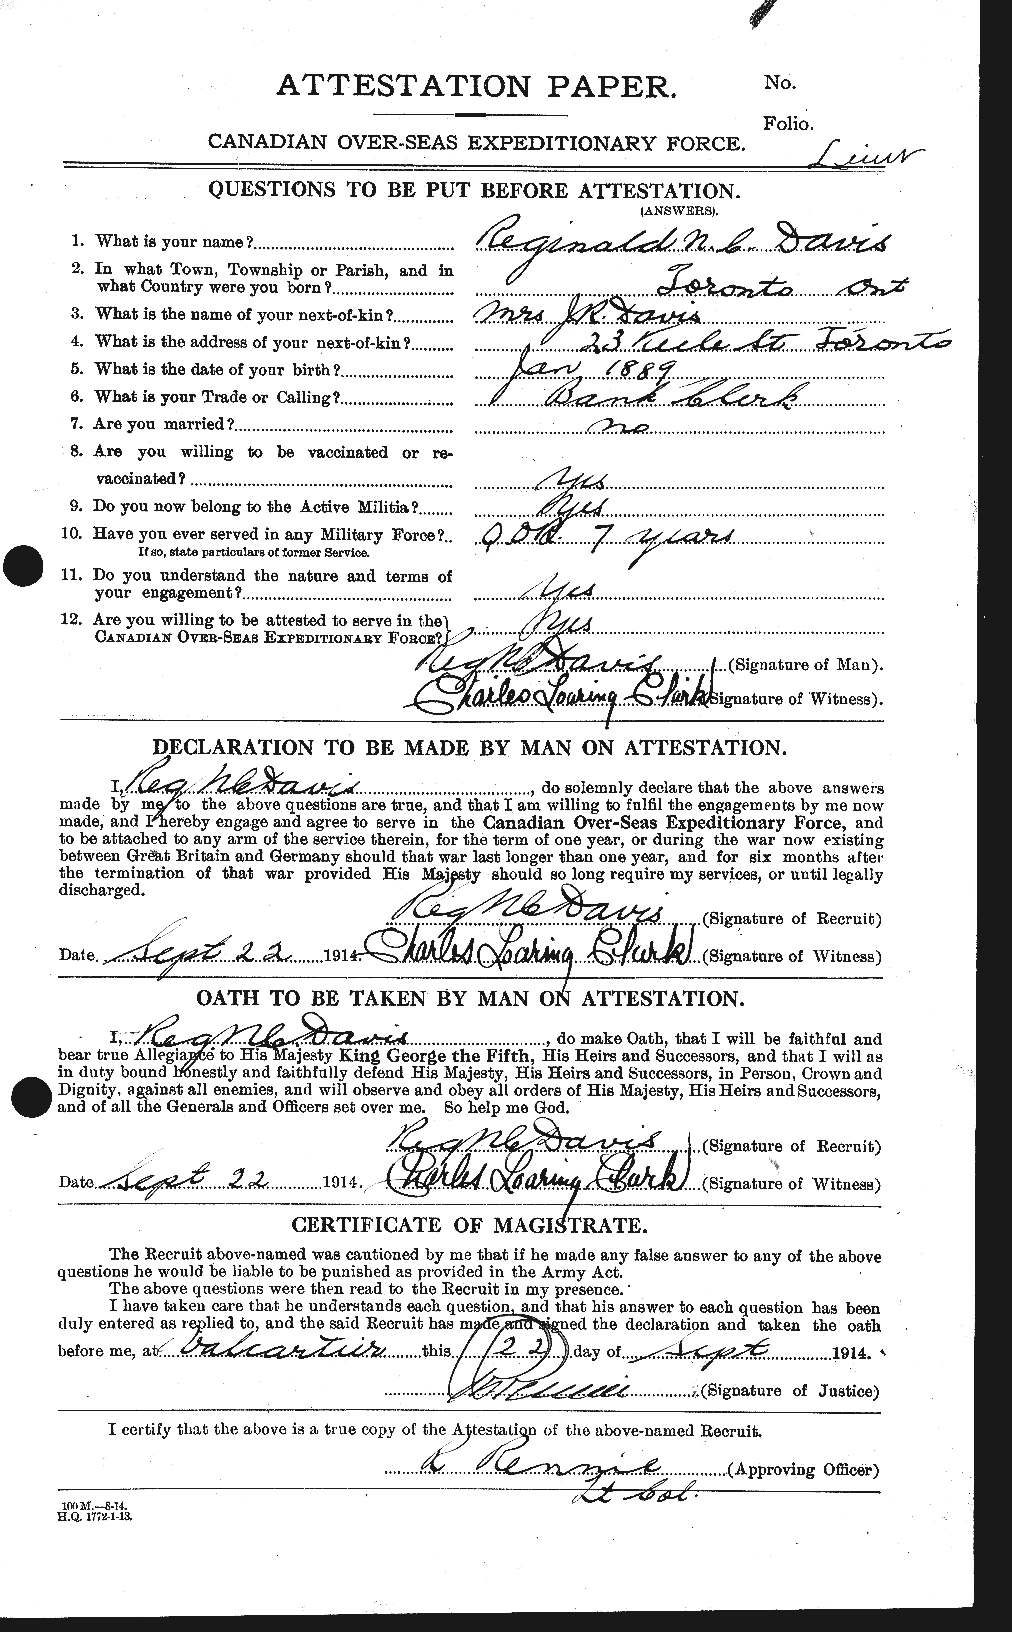 Personnel Records of the First World War - CEF 284245a